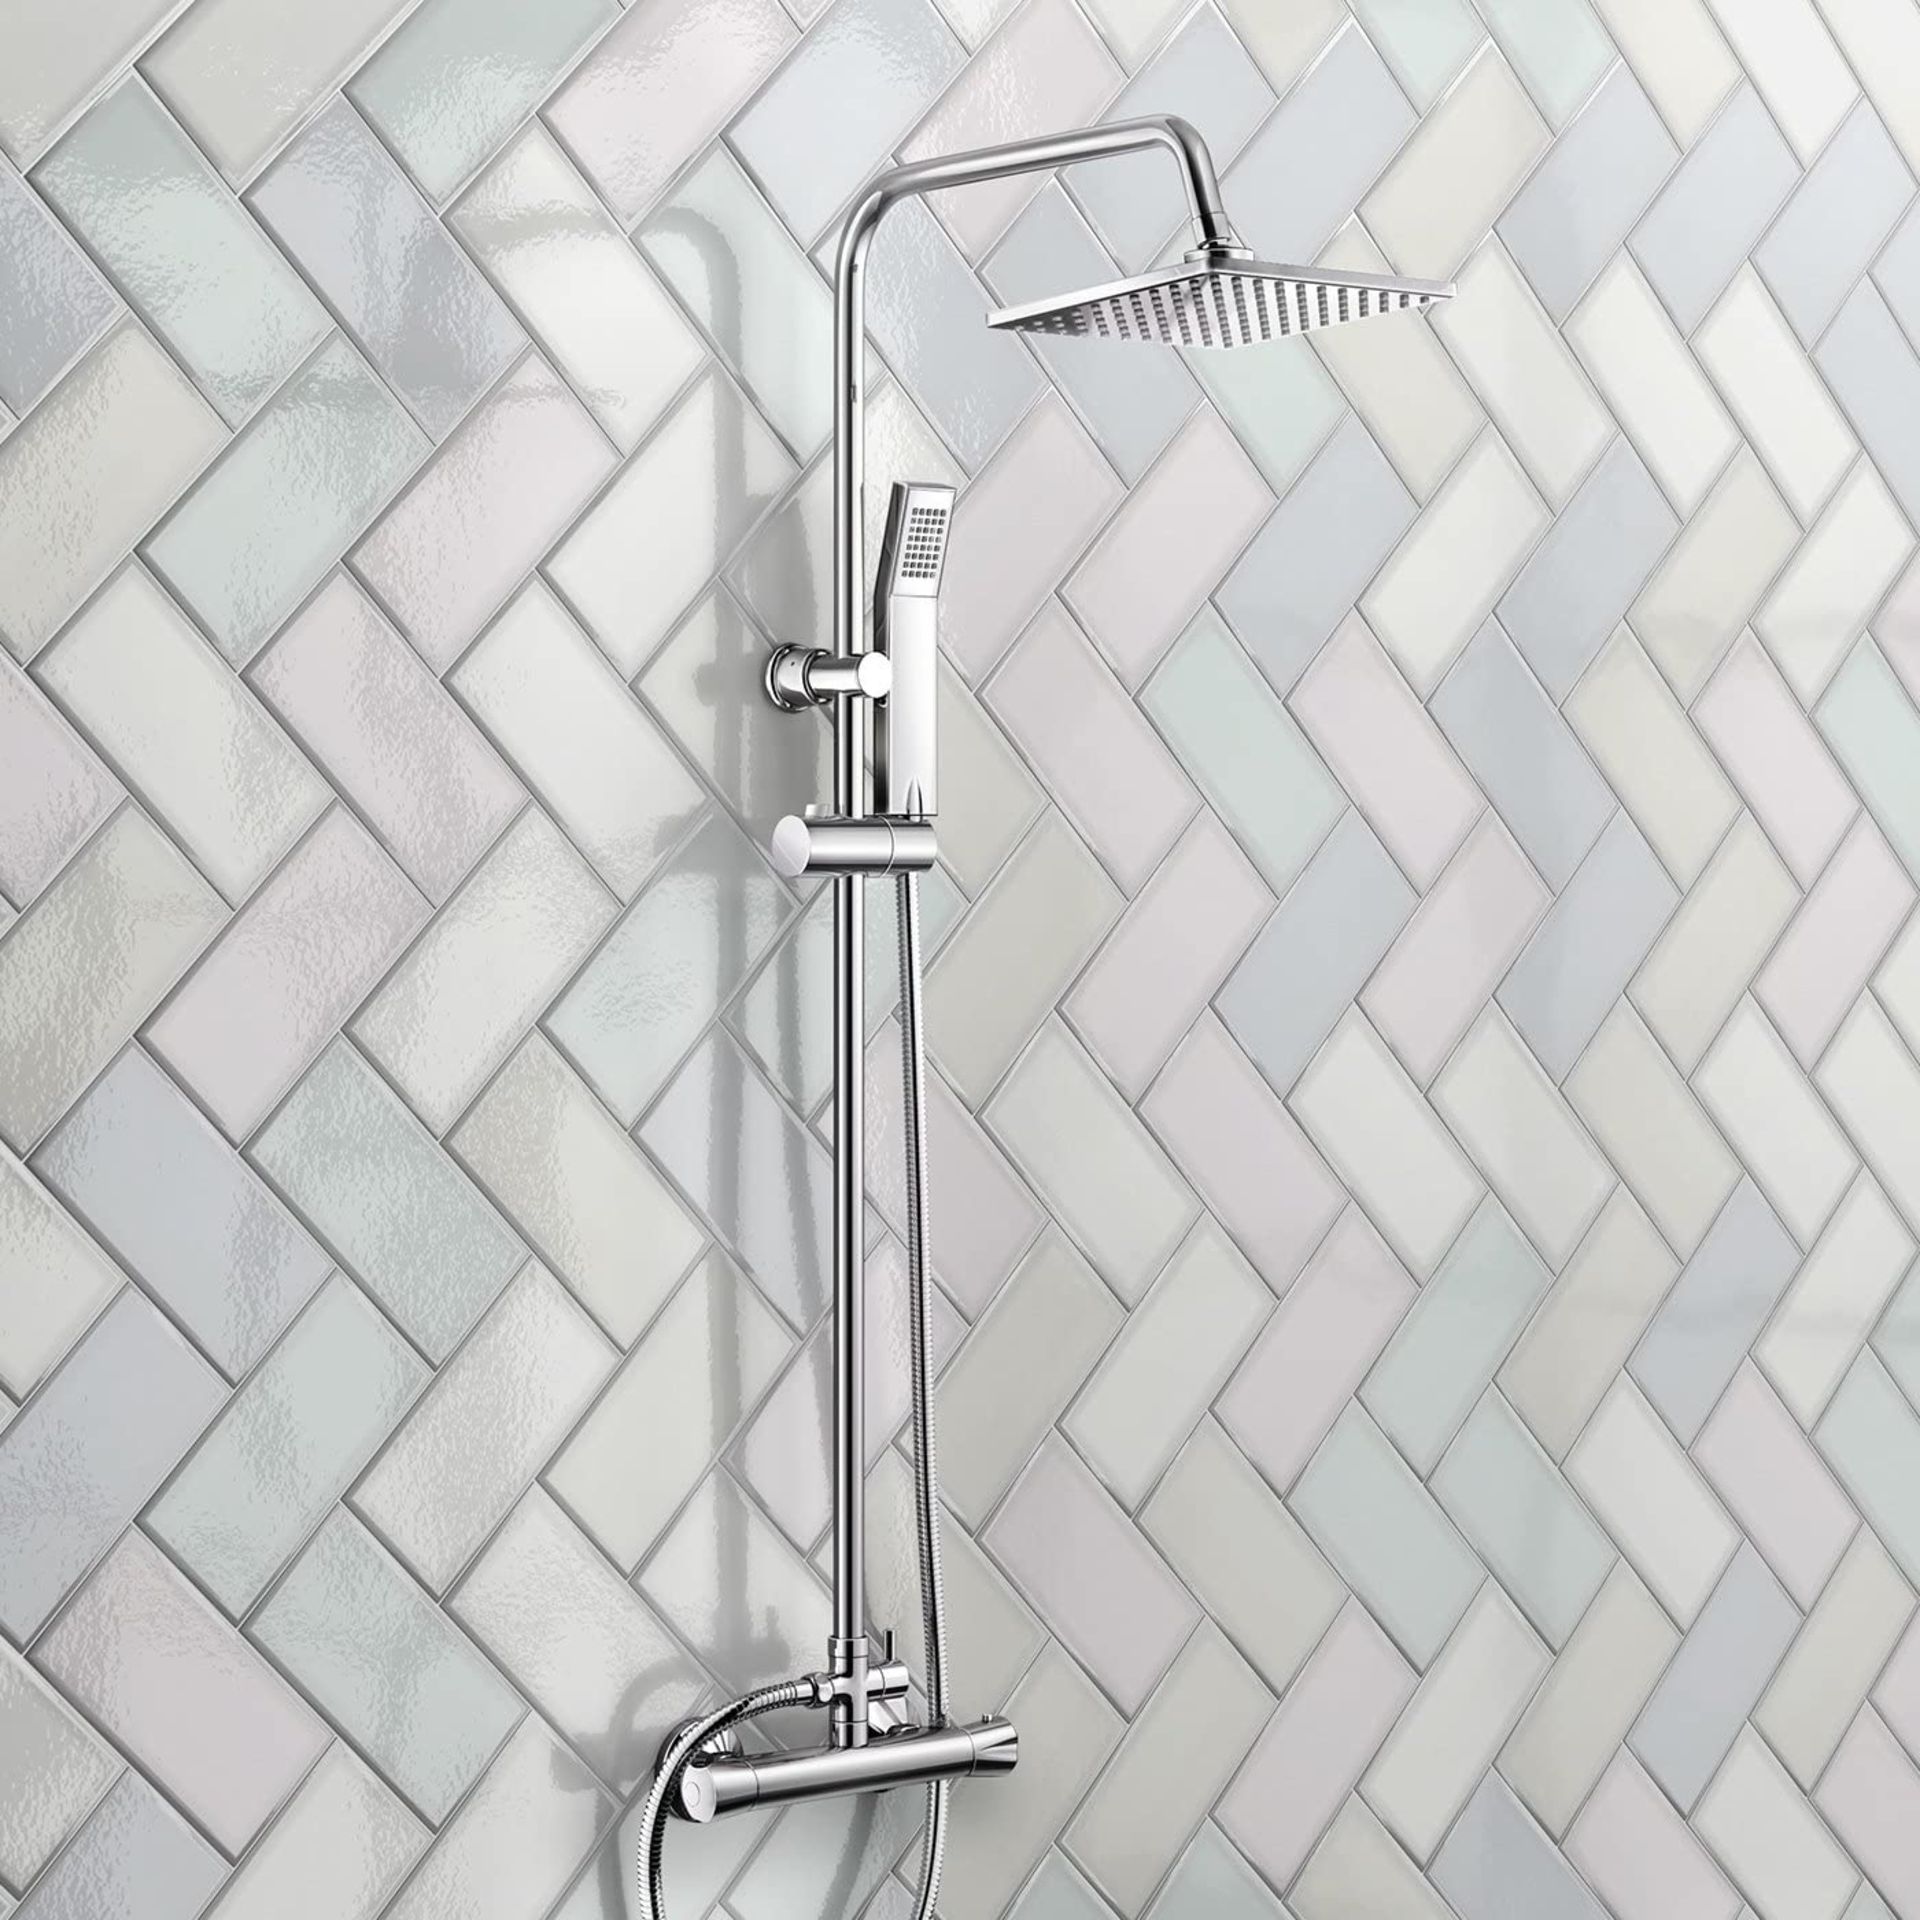 New & Boxed Exposed Thermostatic 2-Way Bar Mixer Shower Set. Chrome Valve, 200mm Square Head + ...